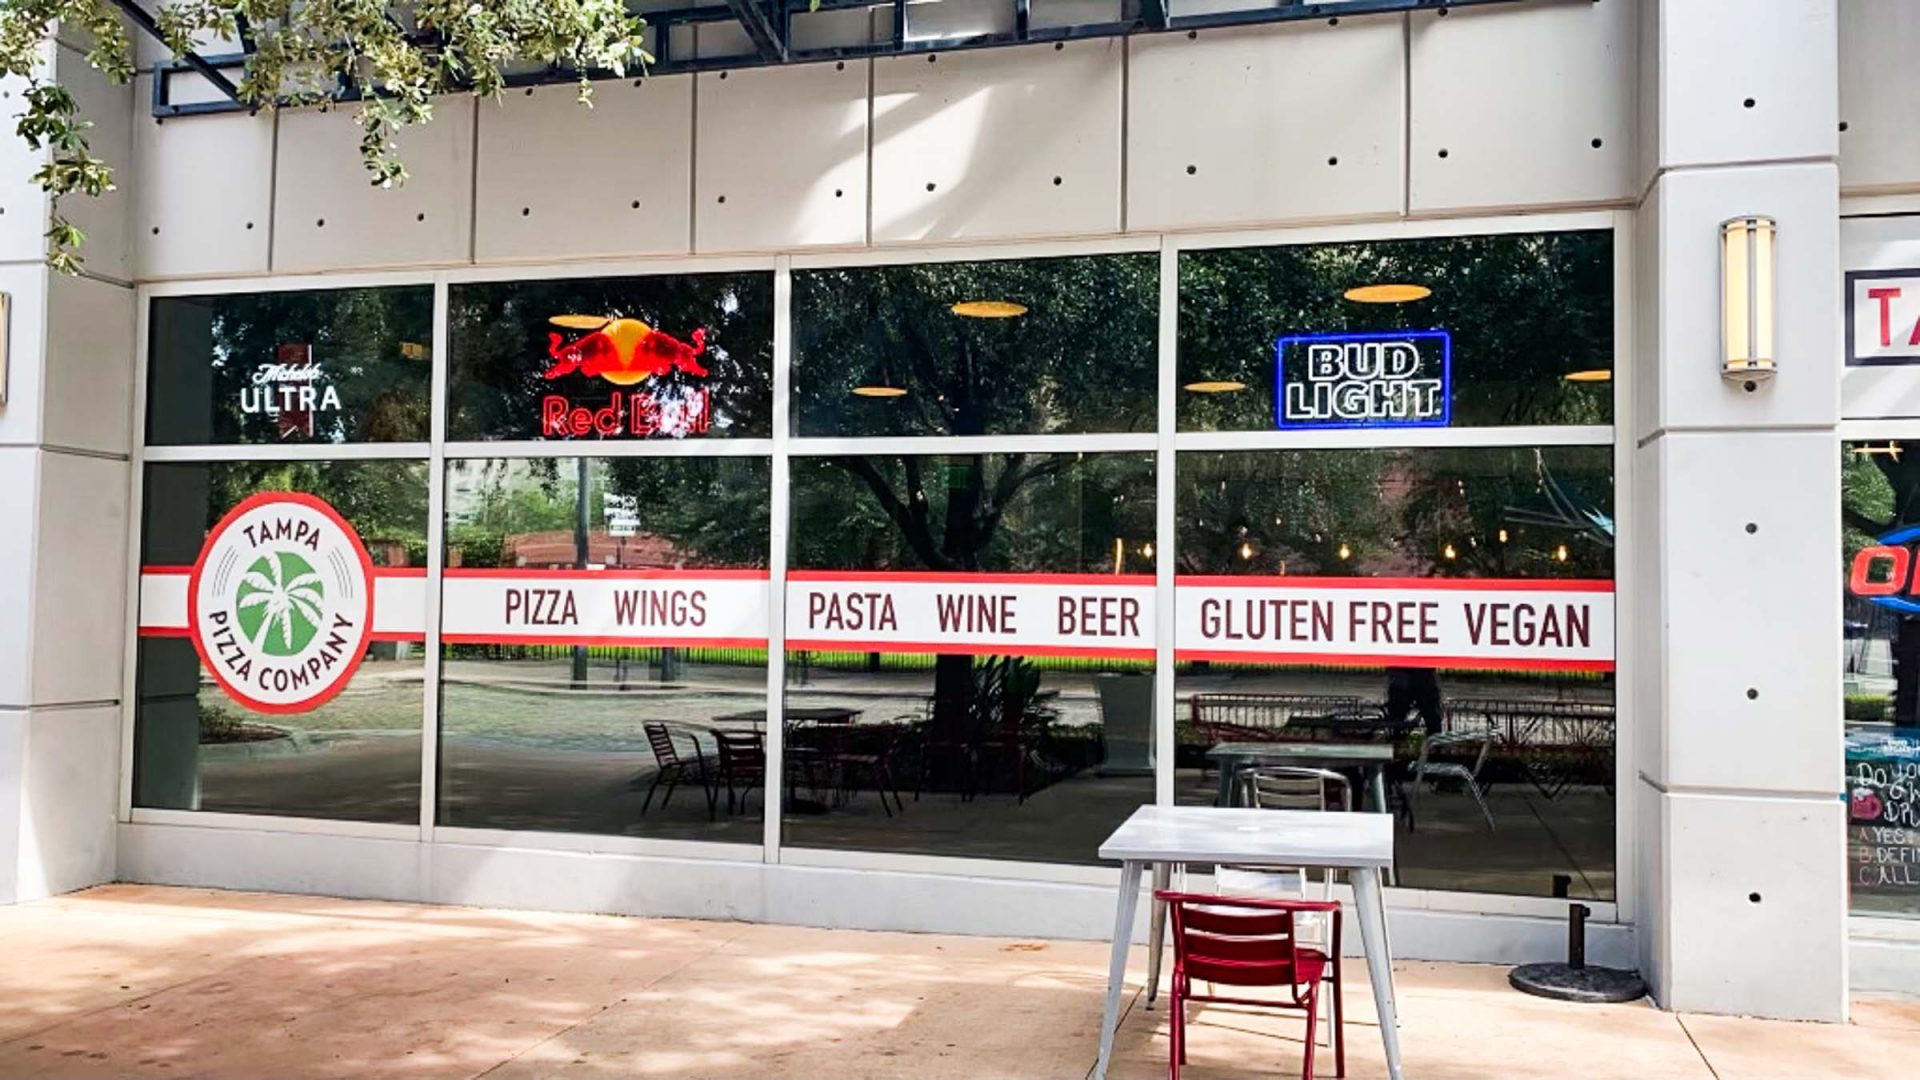 Tampa Pizza Company storefront